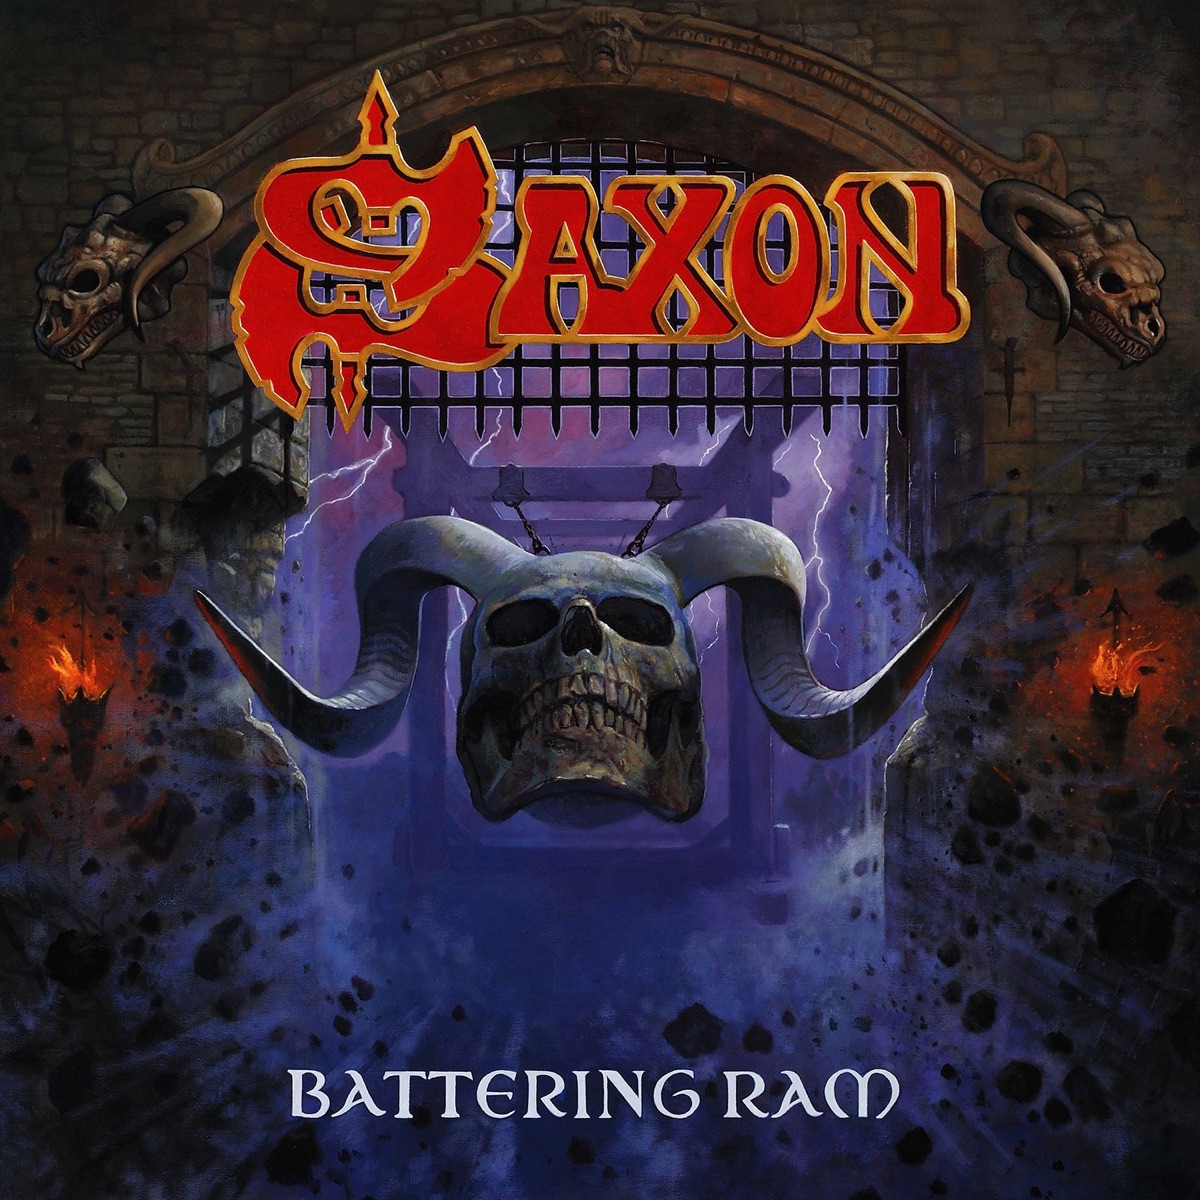 Battering Ram (Deluxe Edition) by Saxon on Apple Music